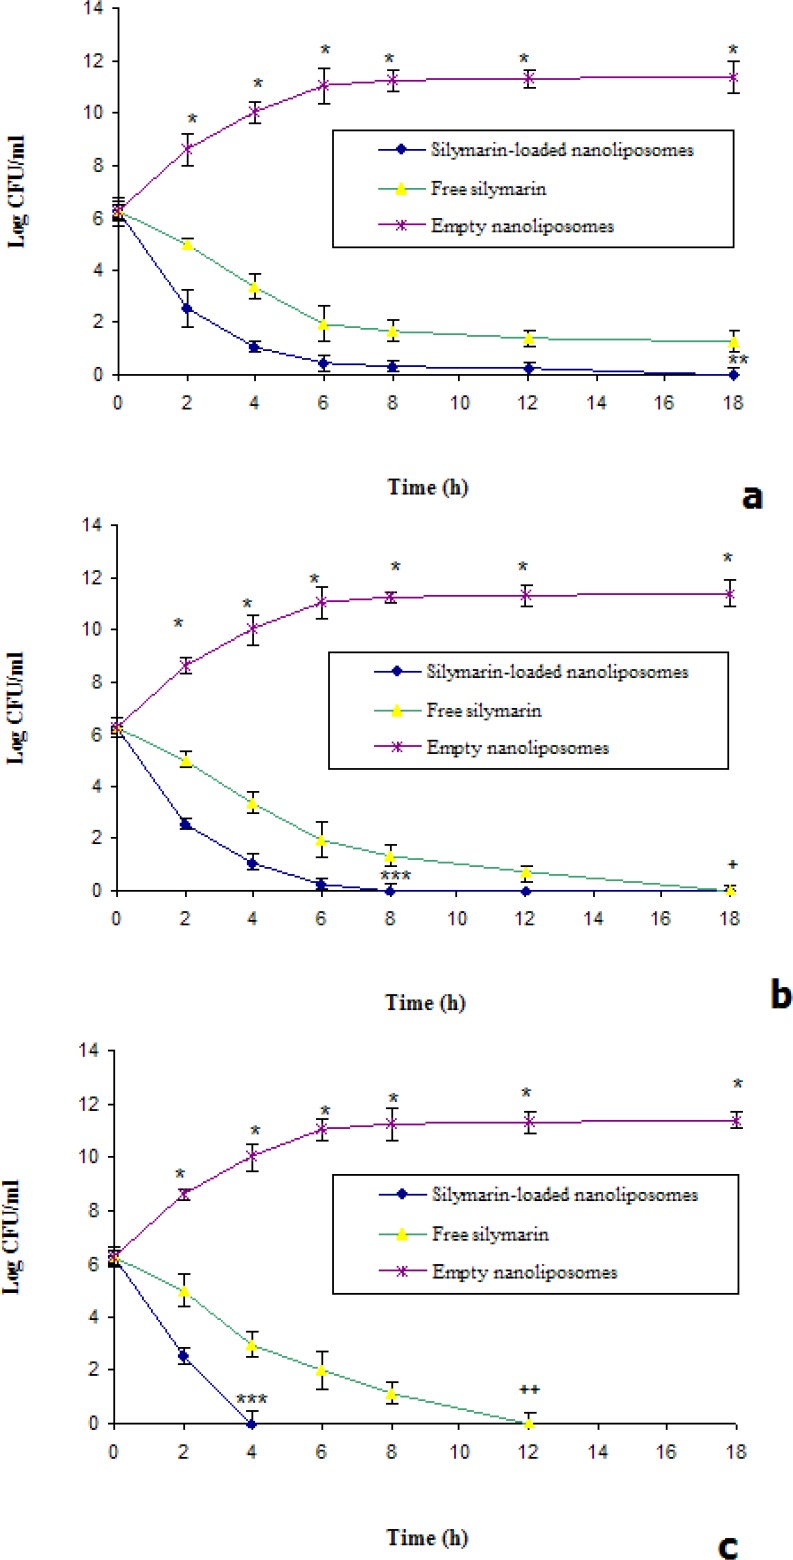 Killing curves for isolated strain S. aureus was exposed to various concentrations (a=1×MIC, b=2×MIC and c=4×MIC) of silymarin in free and nanoliposomal forms. *Significant difference between killing rate of empty nanoliposomes versus free and silymarin-loaded nanoliposomes (p<0.01), **Significant difference between killing rate of silymarin-loaded nanoliposomes versus free silymarin (p<0.05), ***Significant difference between killing rate of silymarin-loaded nanoliposomes versus free silymarin (p<0.01), +Significant difference between killing rate of free silymarin and empty nanoliposomes (p<0.05). ++Significant difference between killing rate of free silymarin and empty nanoliposomes (p<0.01).